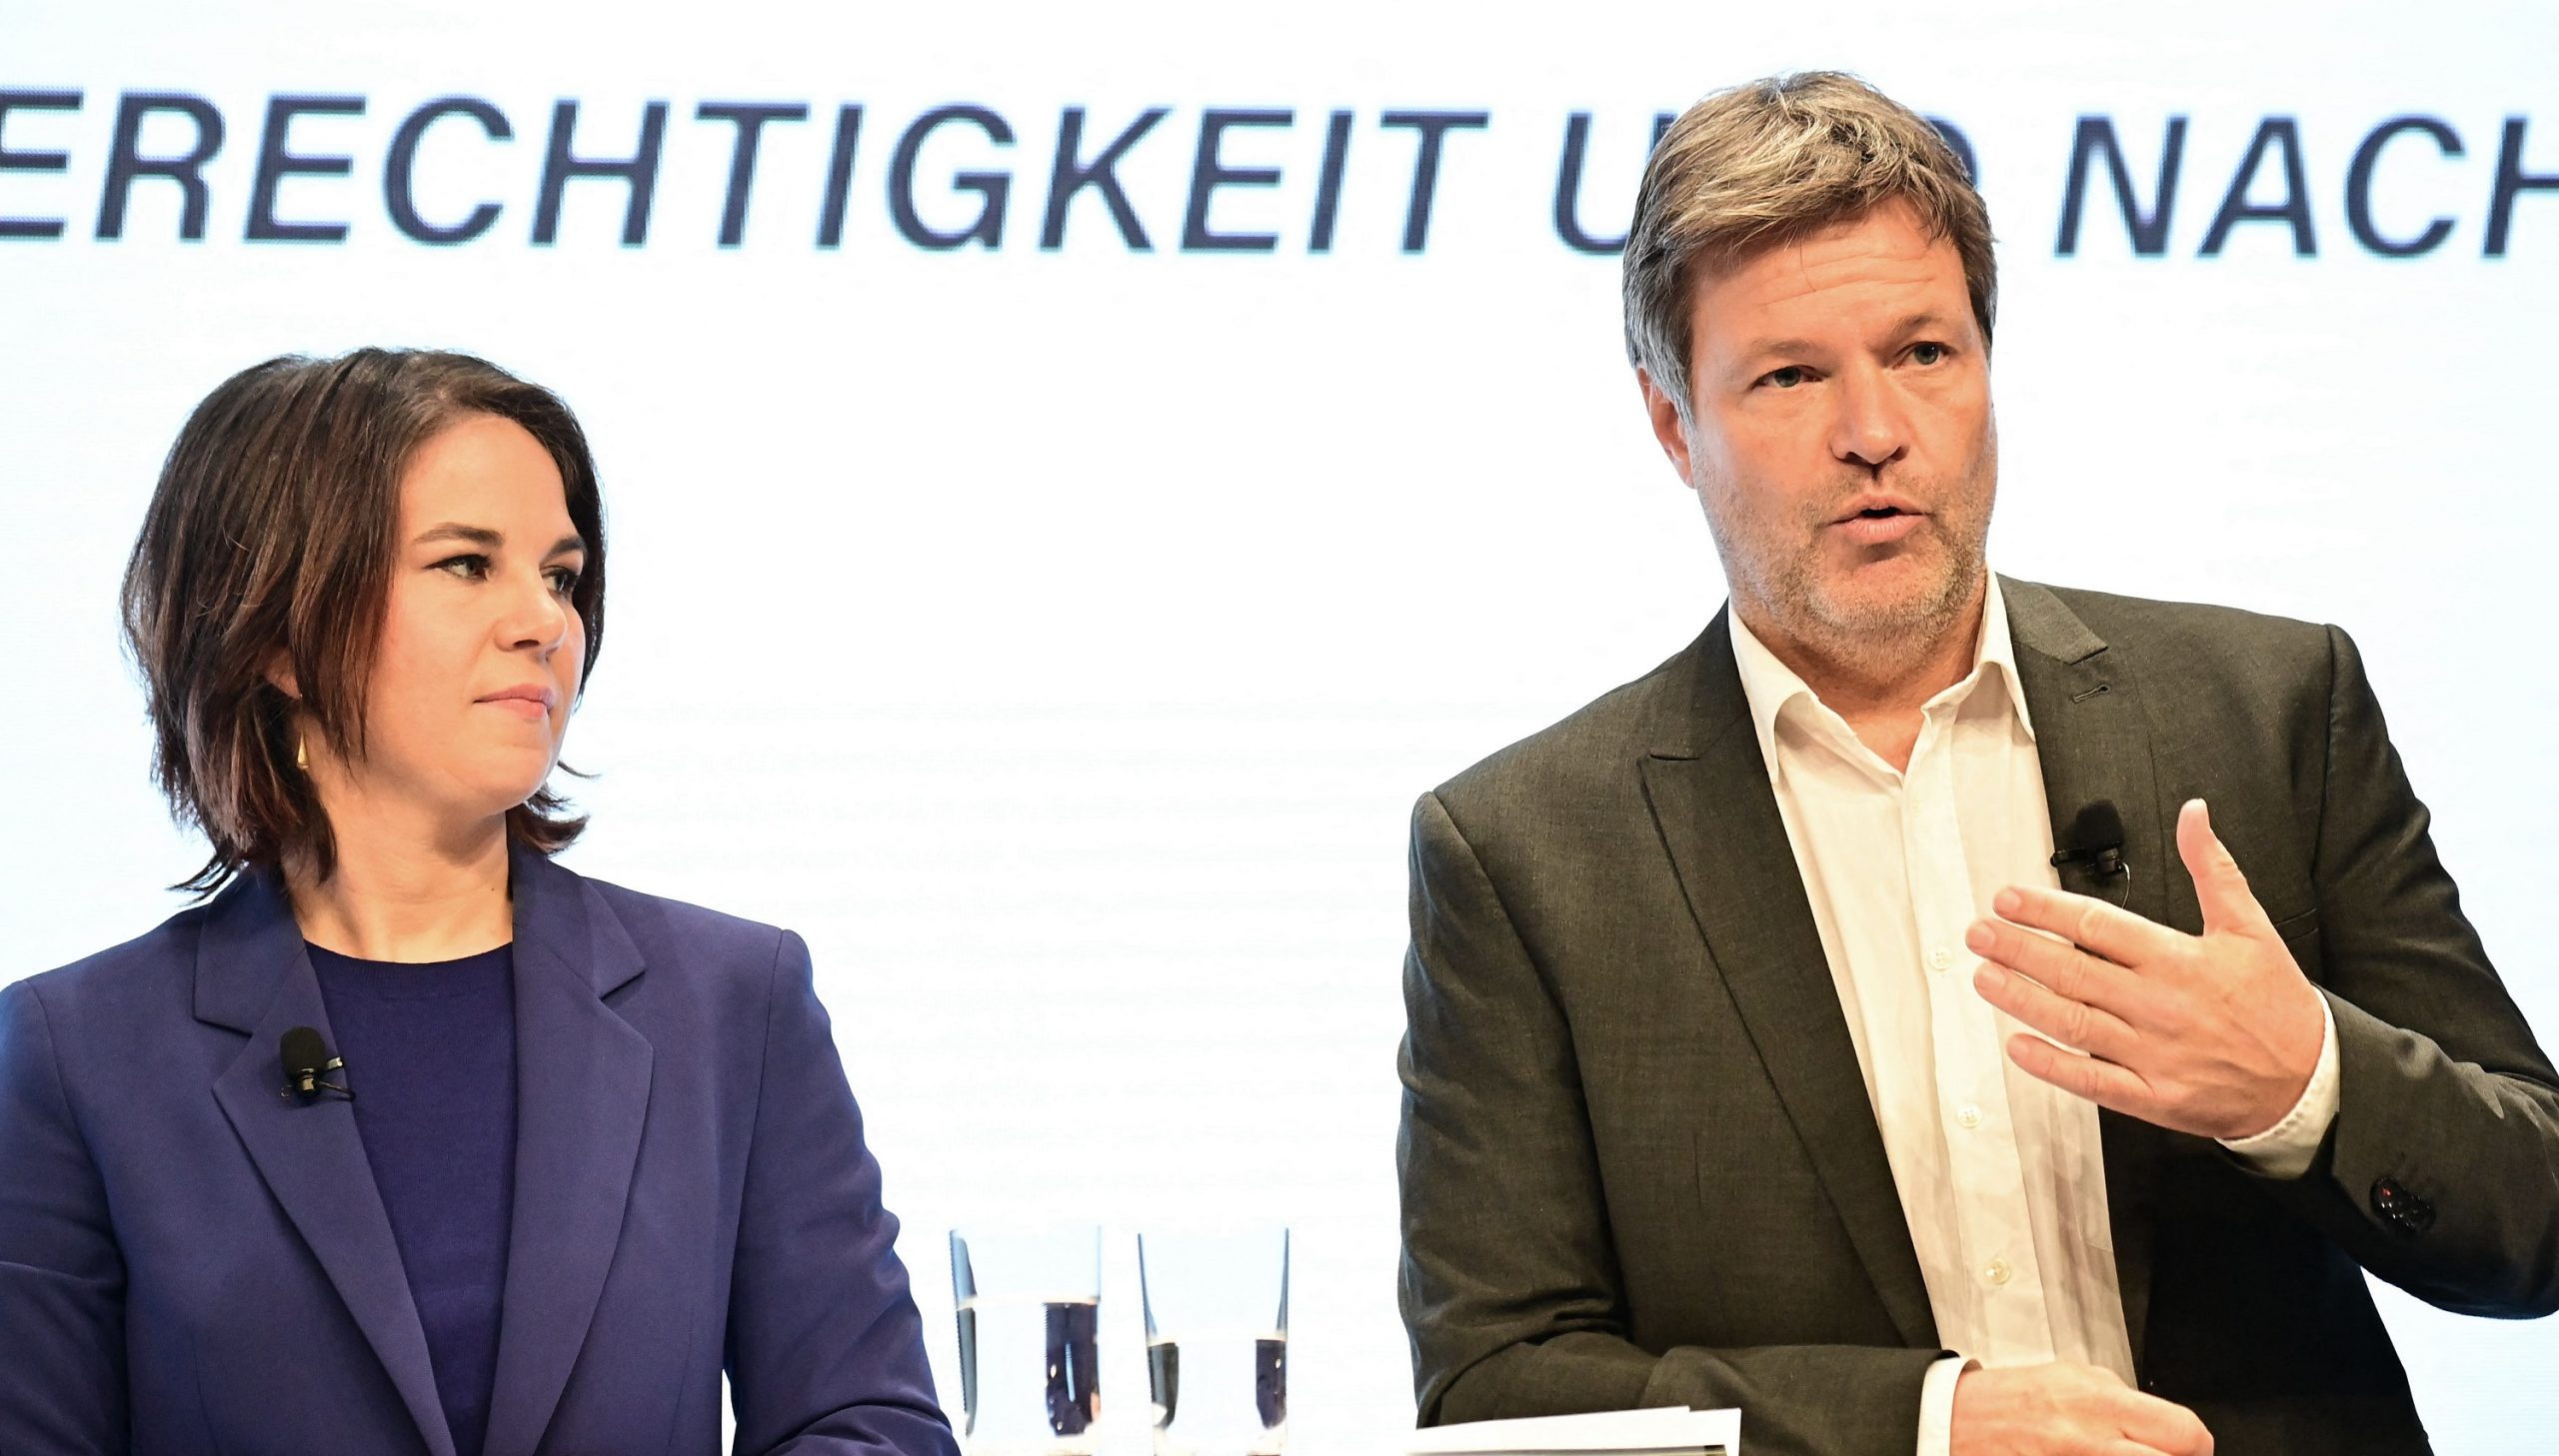 German Green Party leaders Annalena Baerbock and Robert Habeck at a conference in November